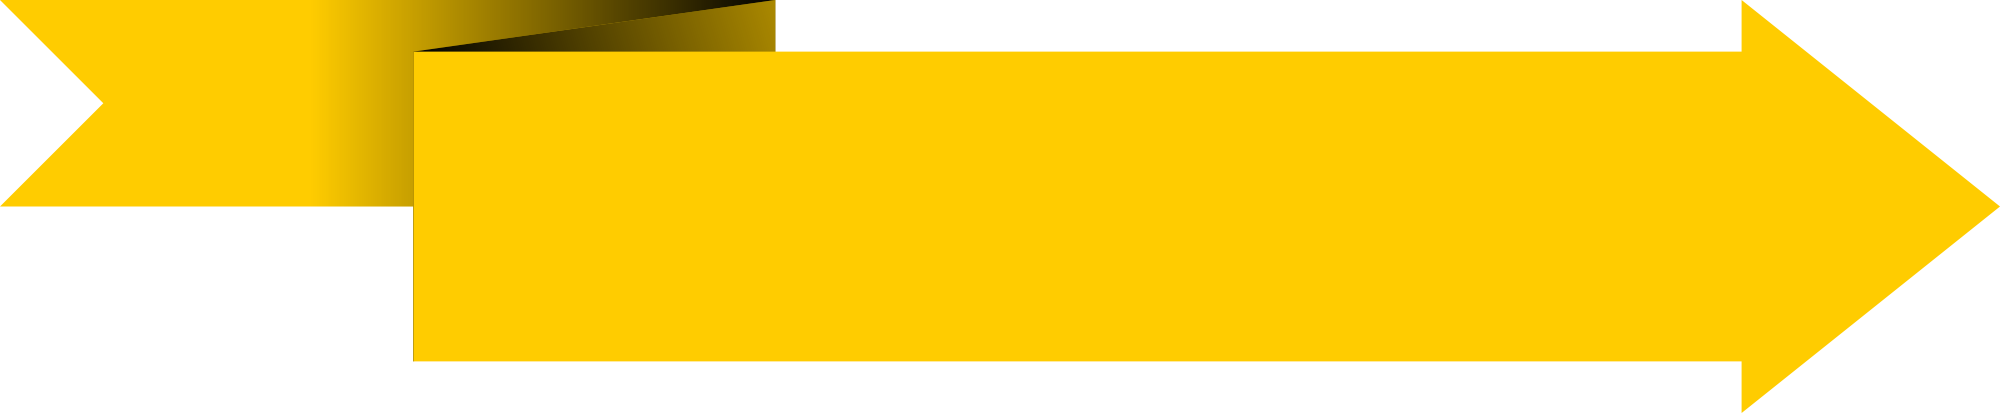 Clipart arrow banner. Yellow scroll background wave